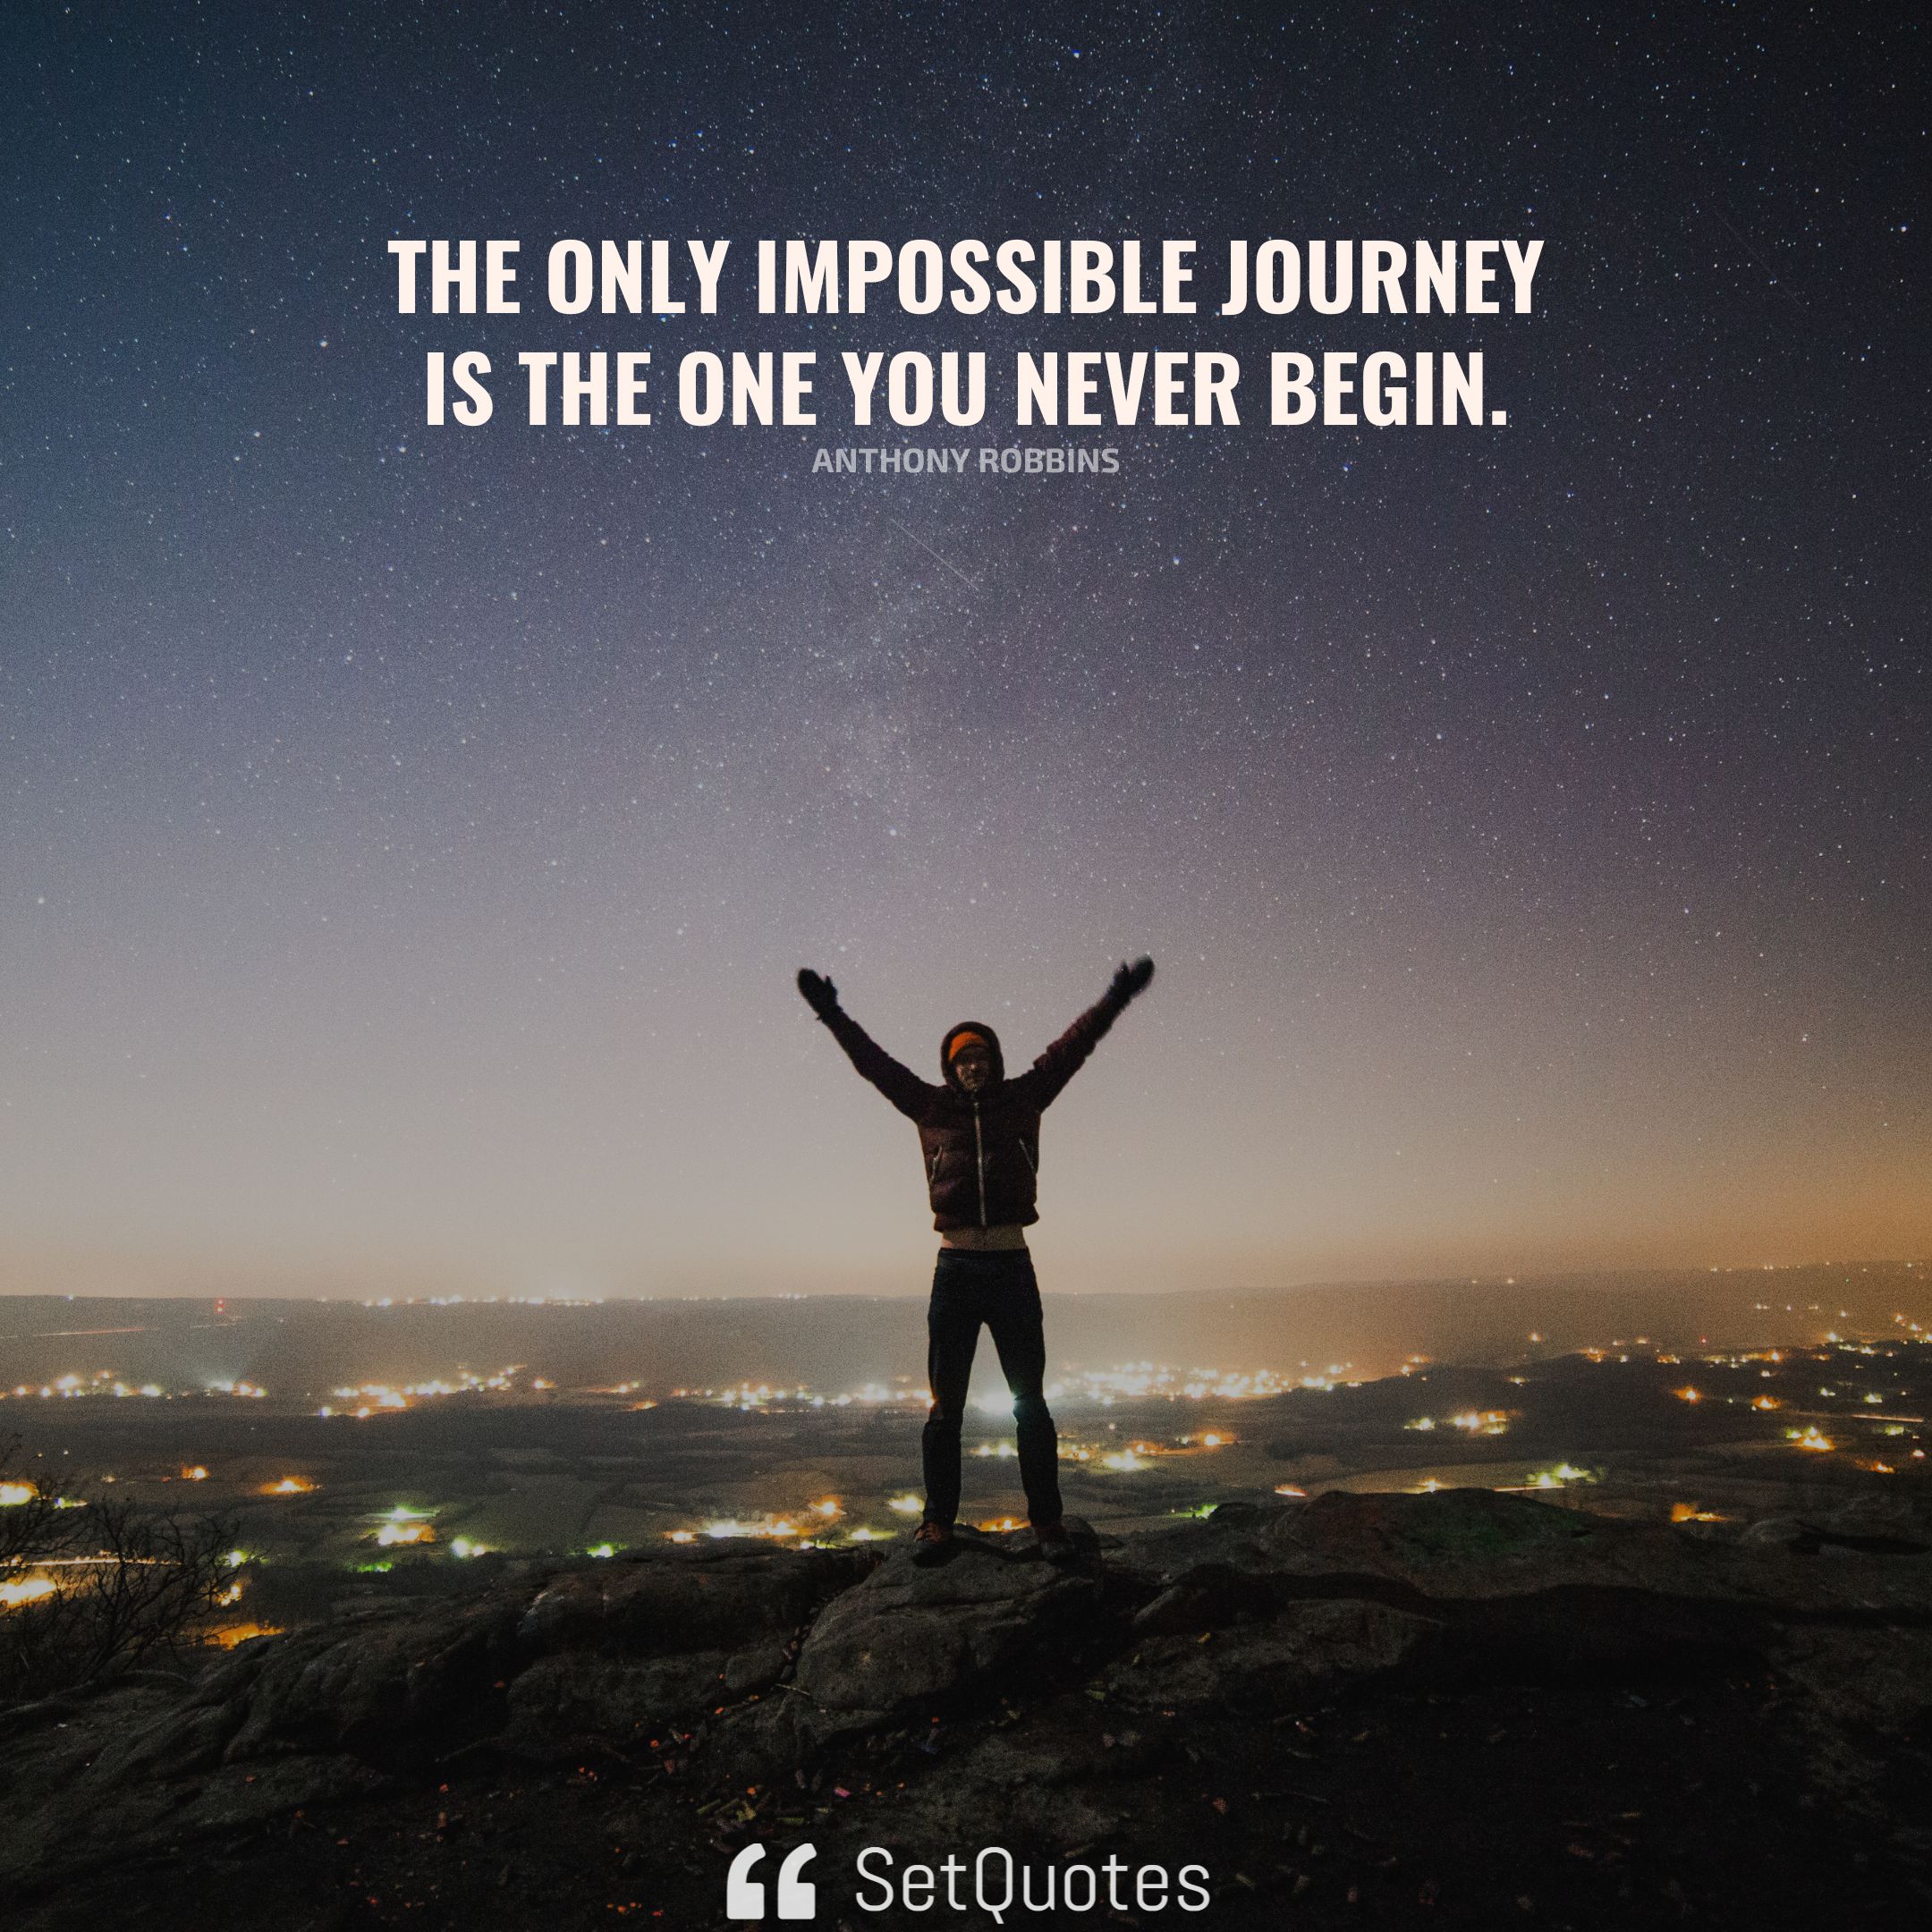 The only impossible journey is the one you never begin. – Anthony Robbins